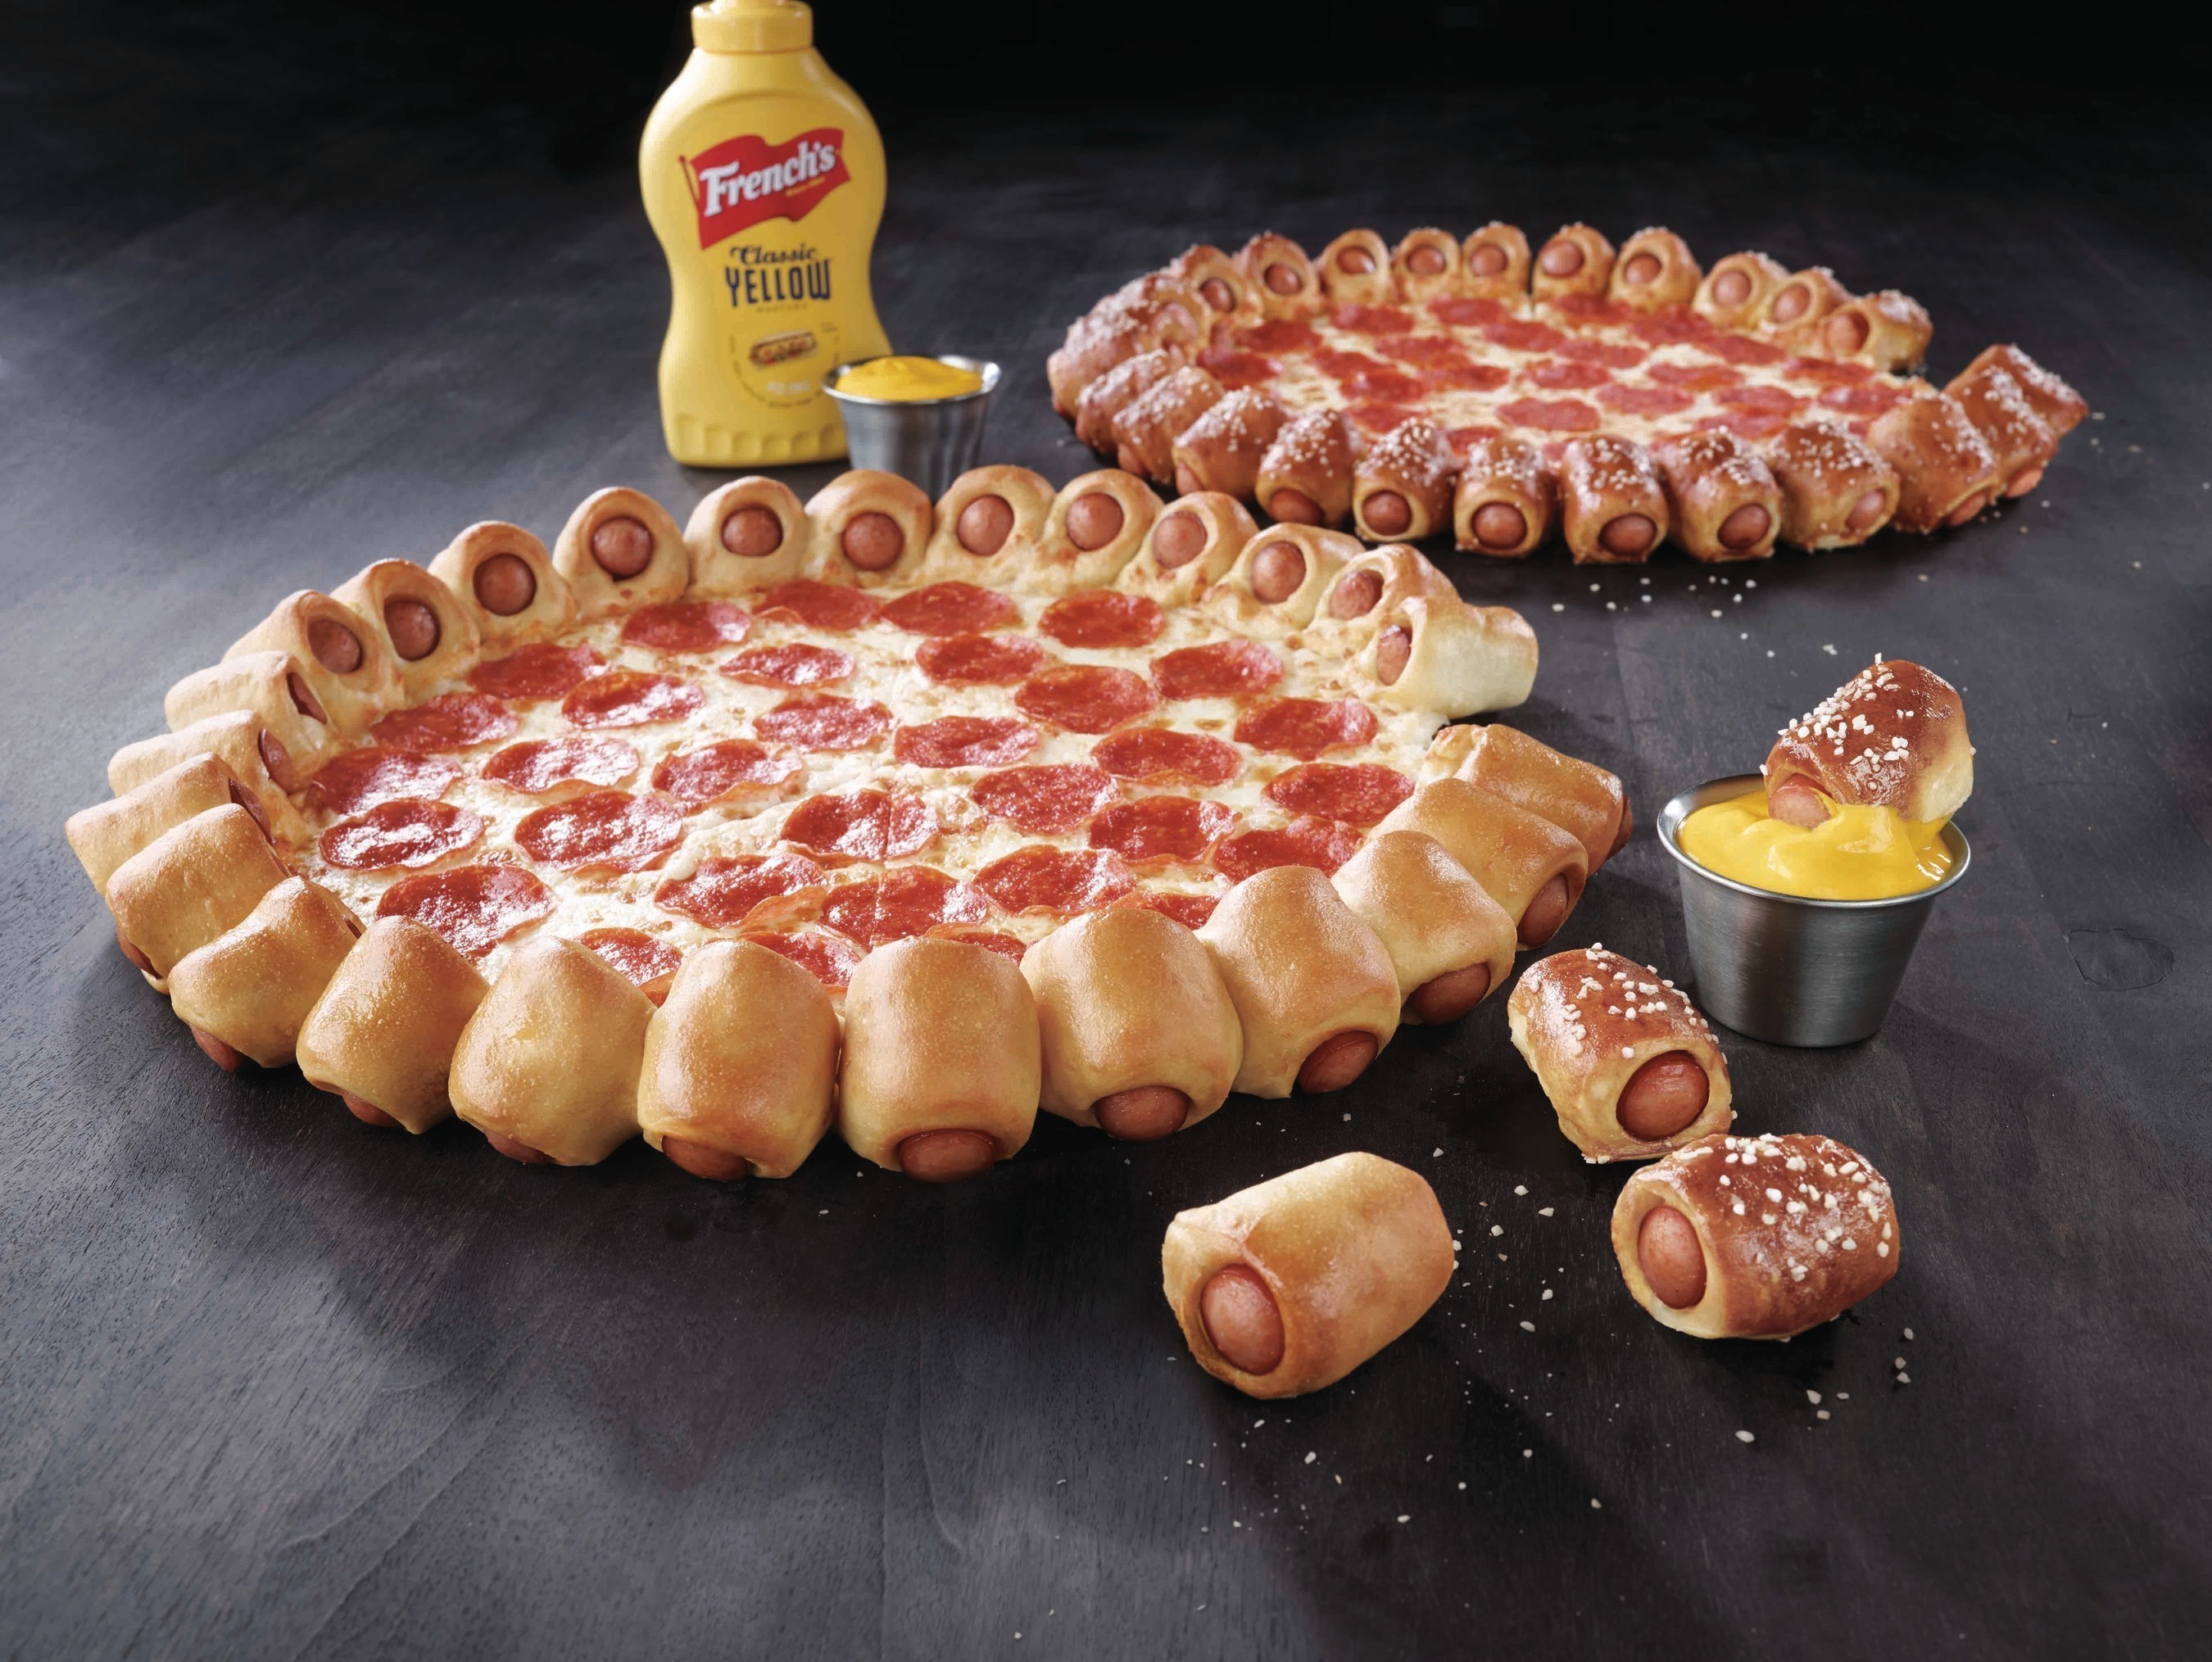 Pizza Hut Hot Dog Bites Pizza available beginning at 11 a.m. on Thursday, June 18.